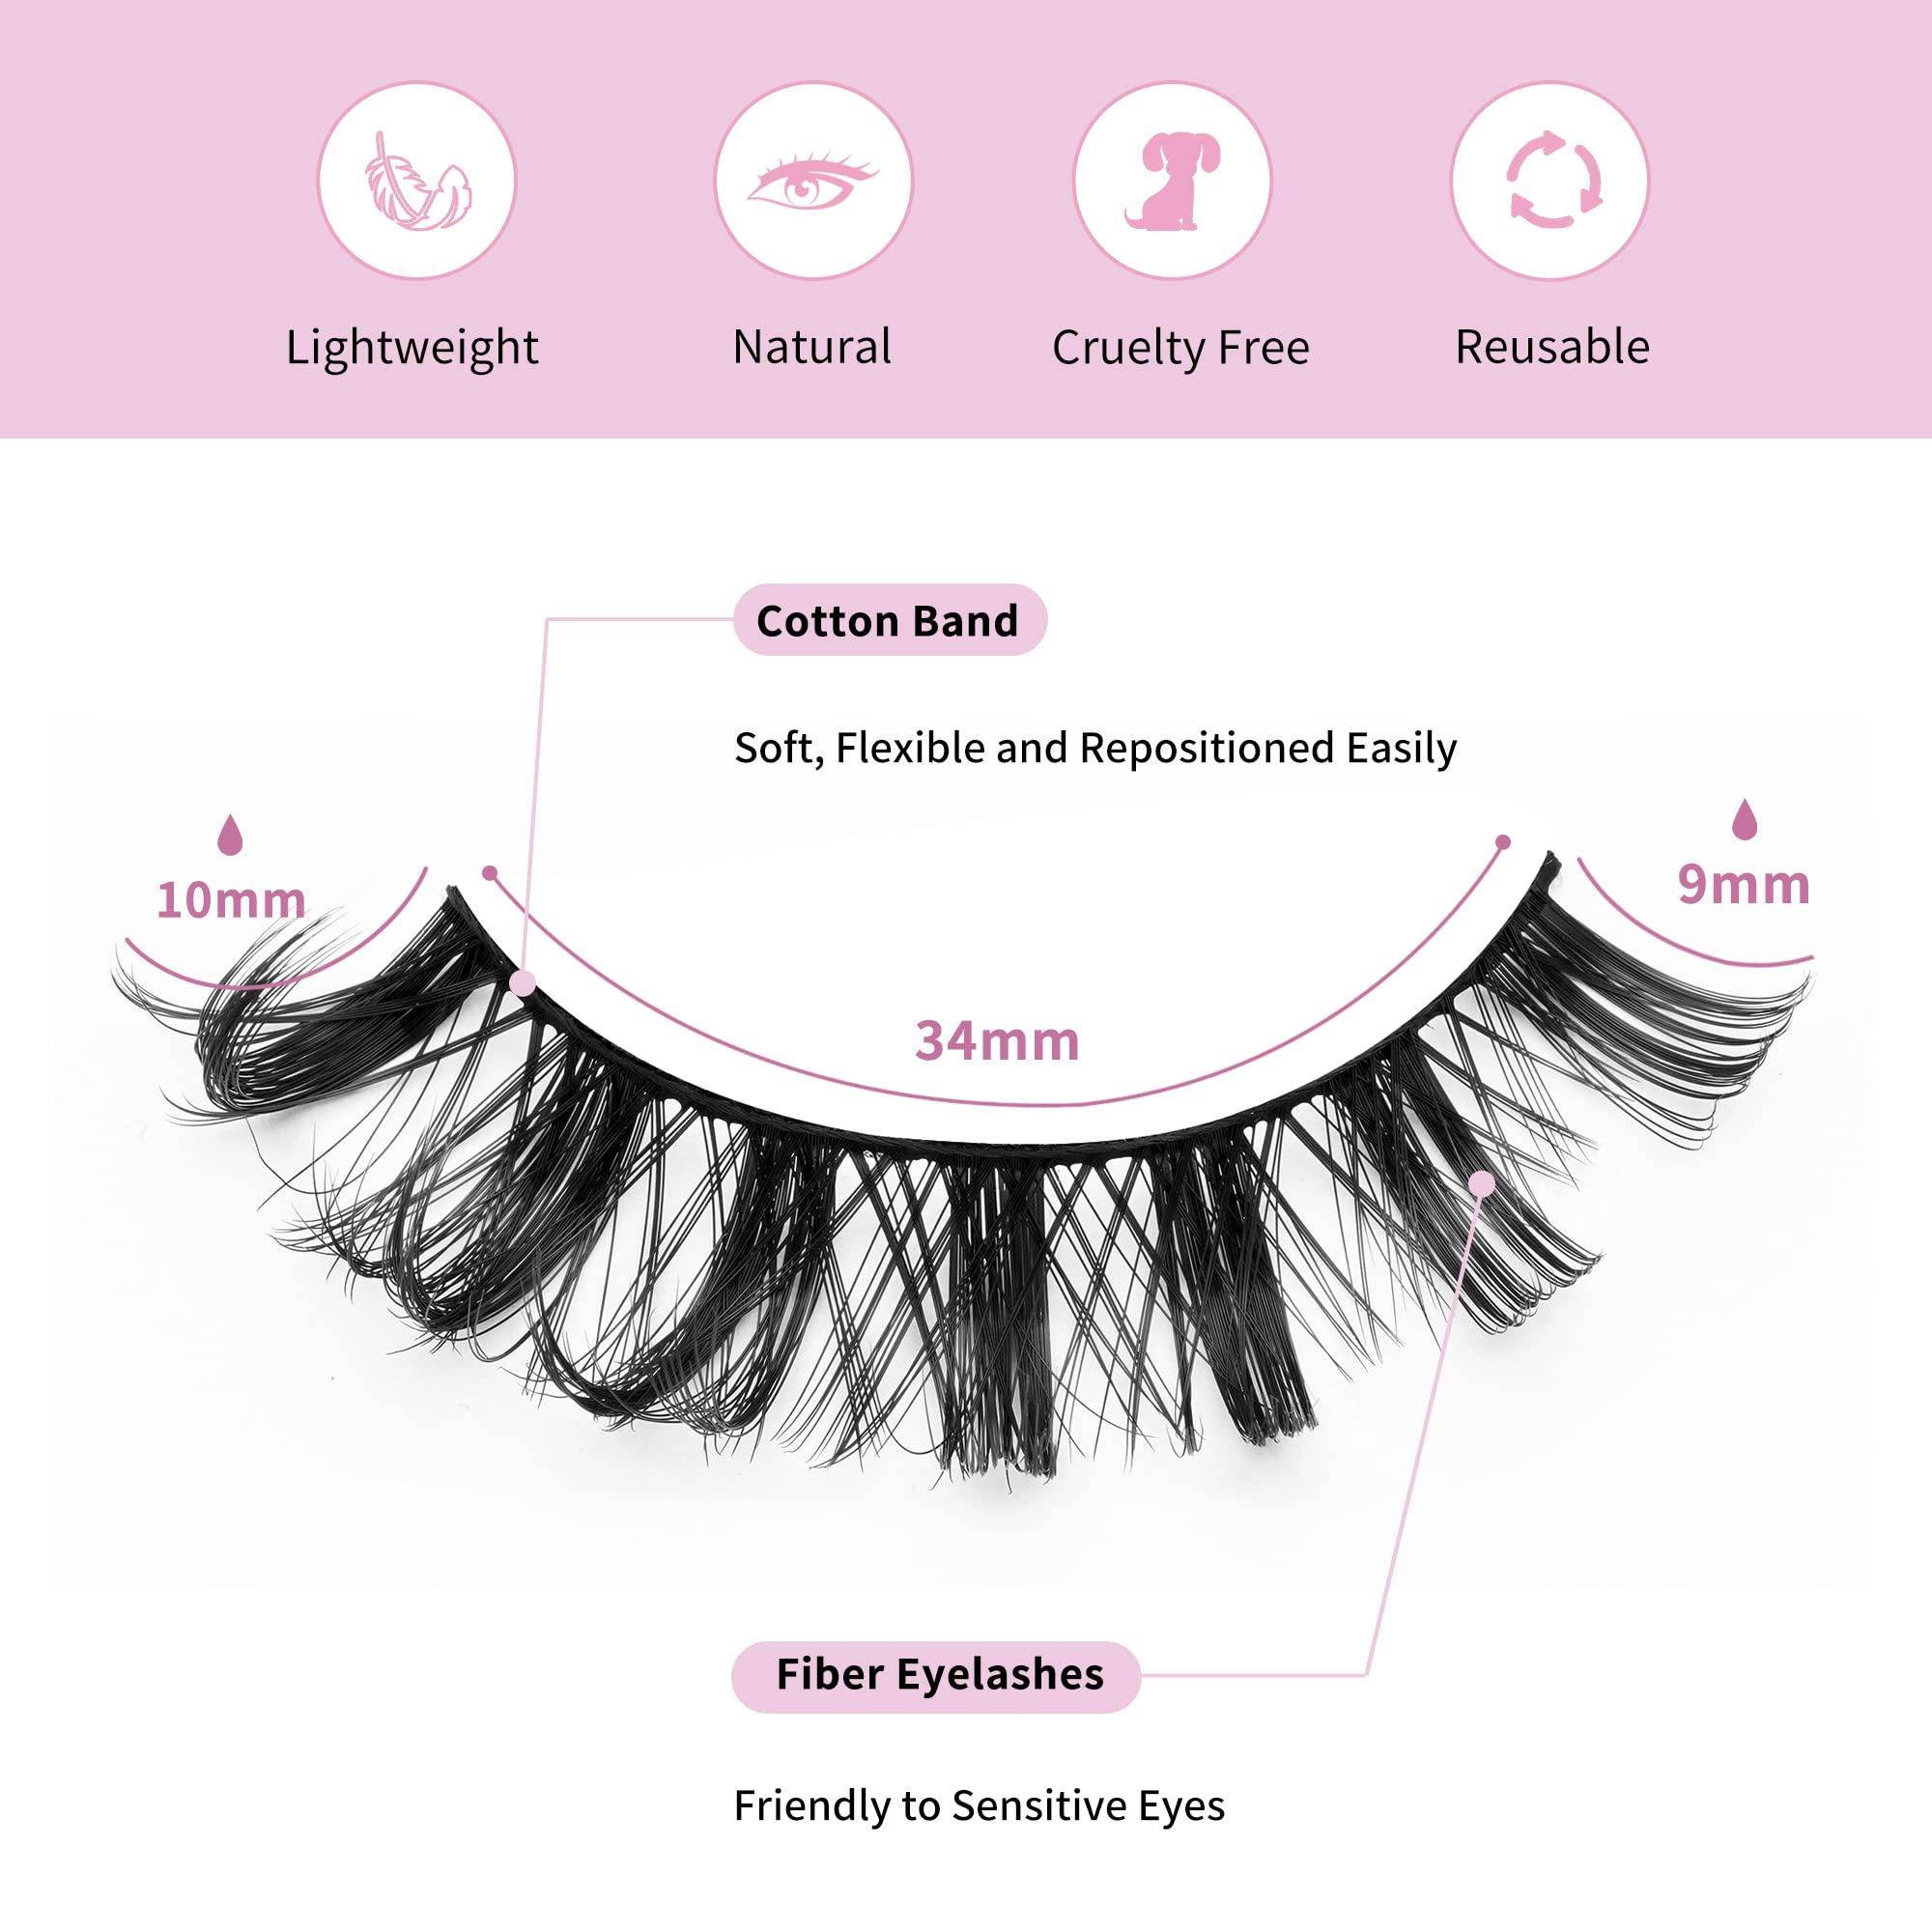 Kanviensl False Eyelashes 10 Pairs Russian Strip Lashes Russian Lashes 3D Effect D Curl 10MM Reusable Lightweight Fake Eyelashes Ideal for Girls Daily Use